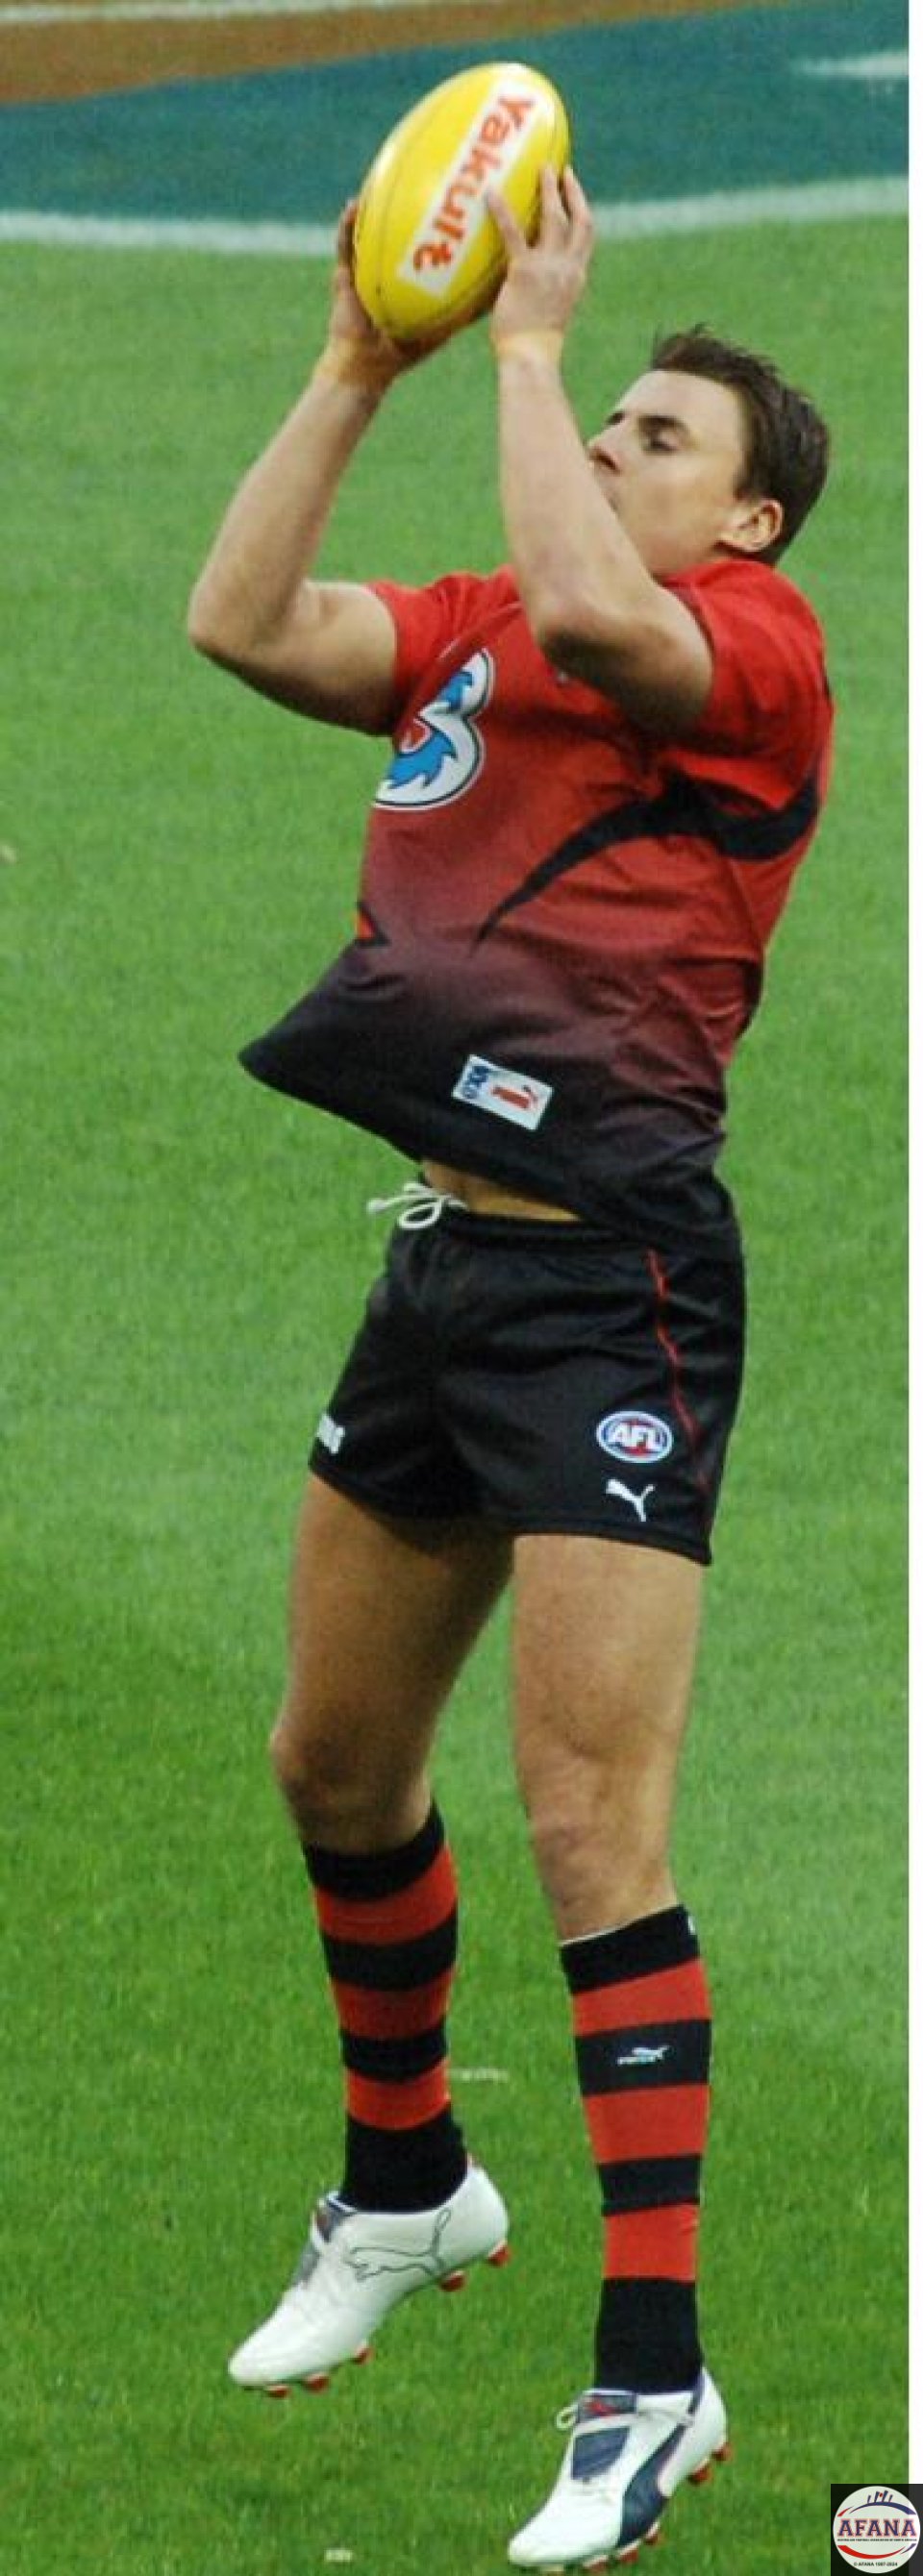 Matthew Lloyd warming up before the game against the Blues.